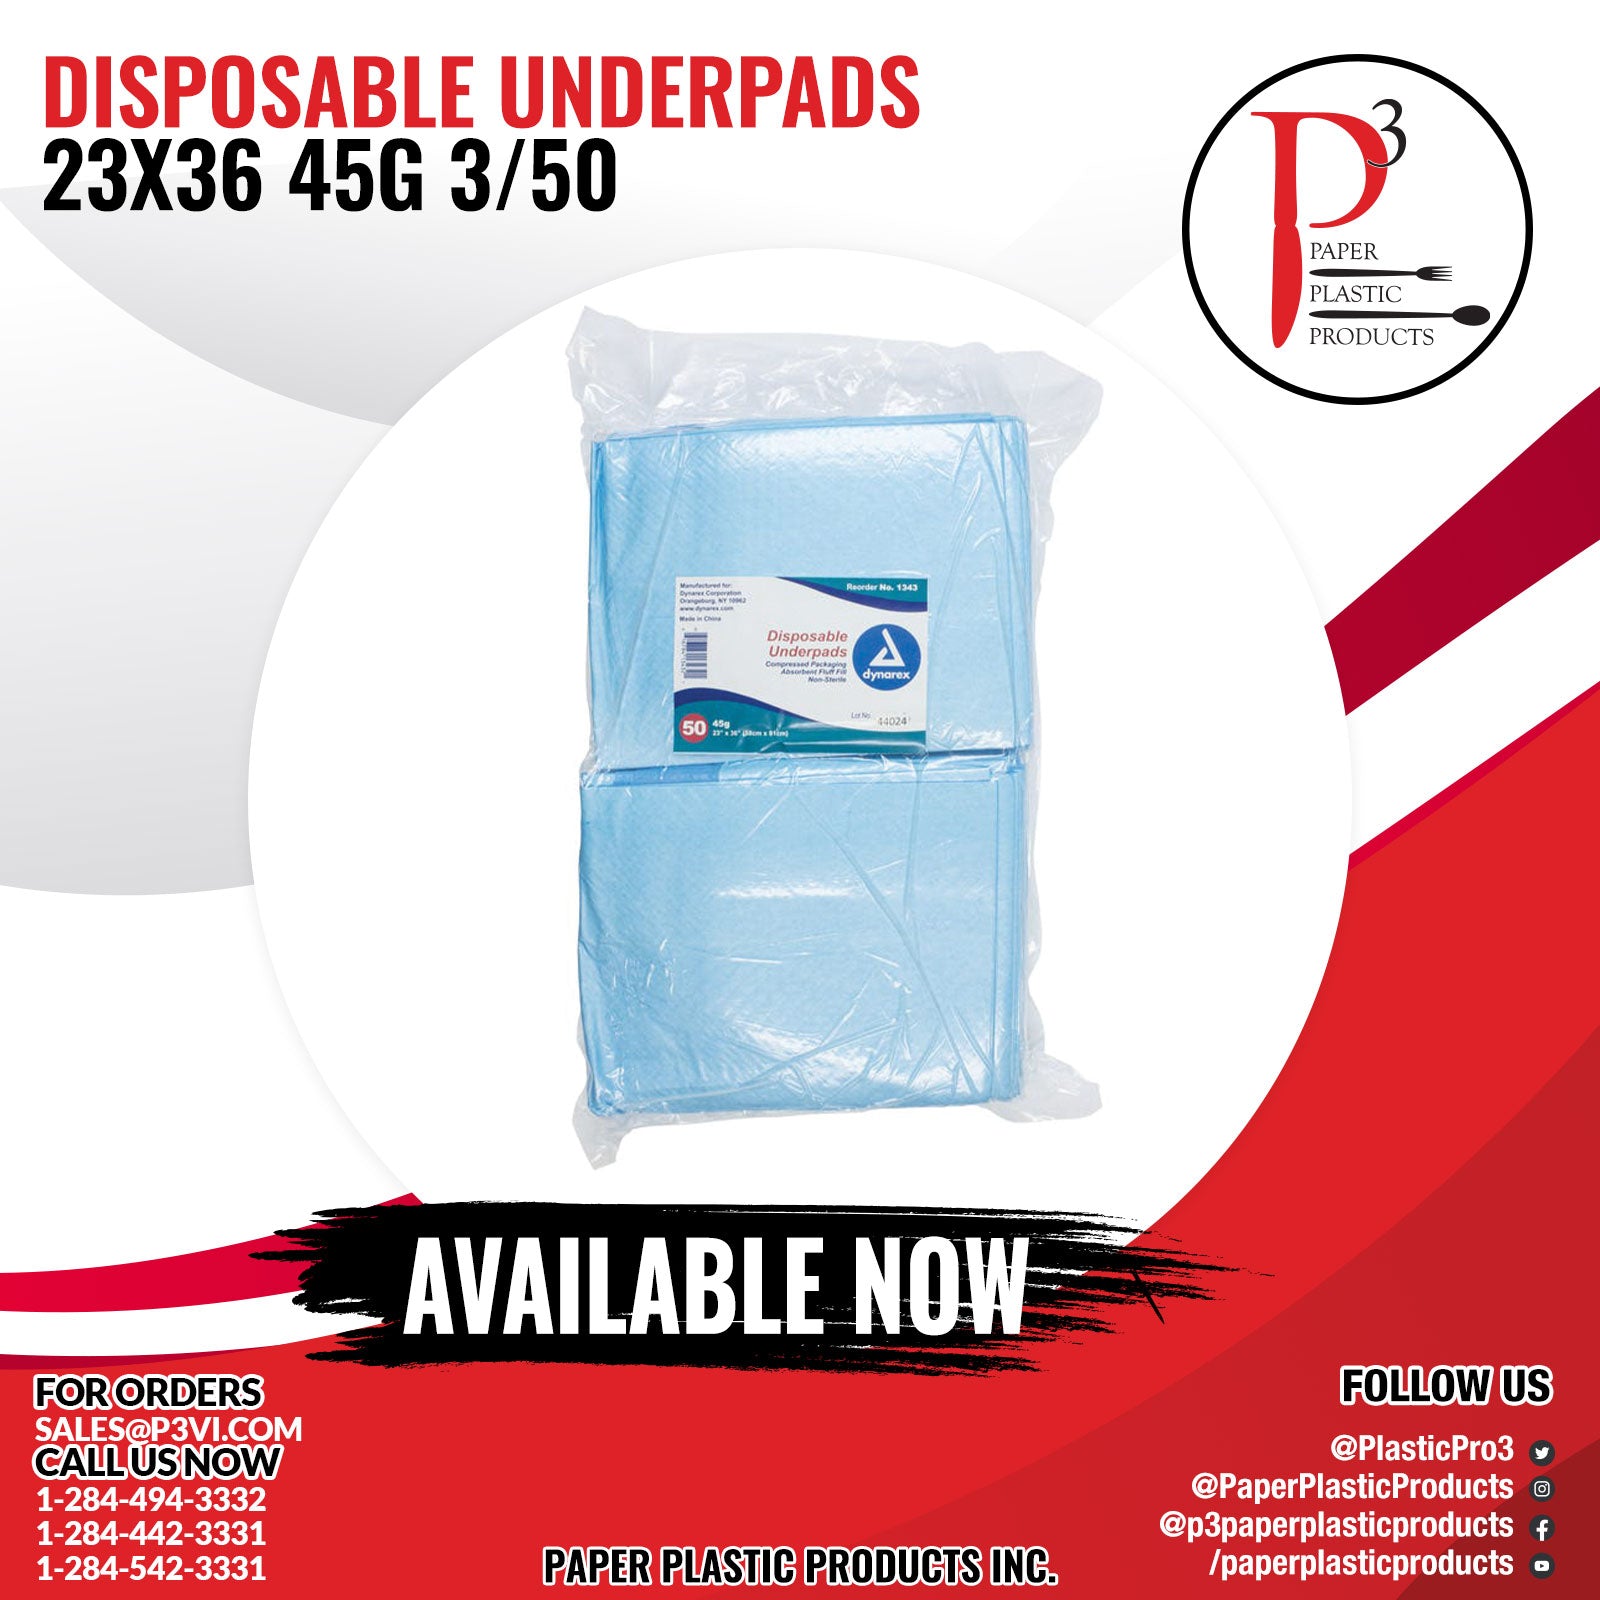 Disposable Underpads 23x36 45g 3/50